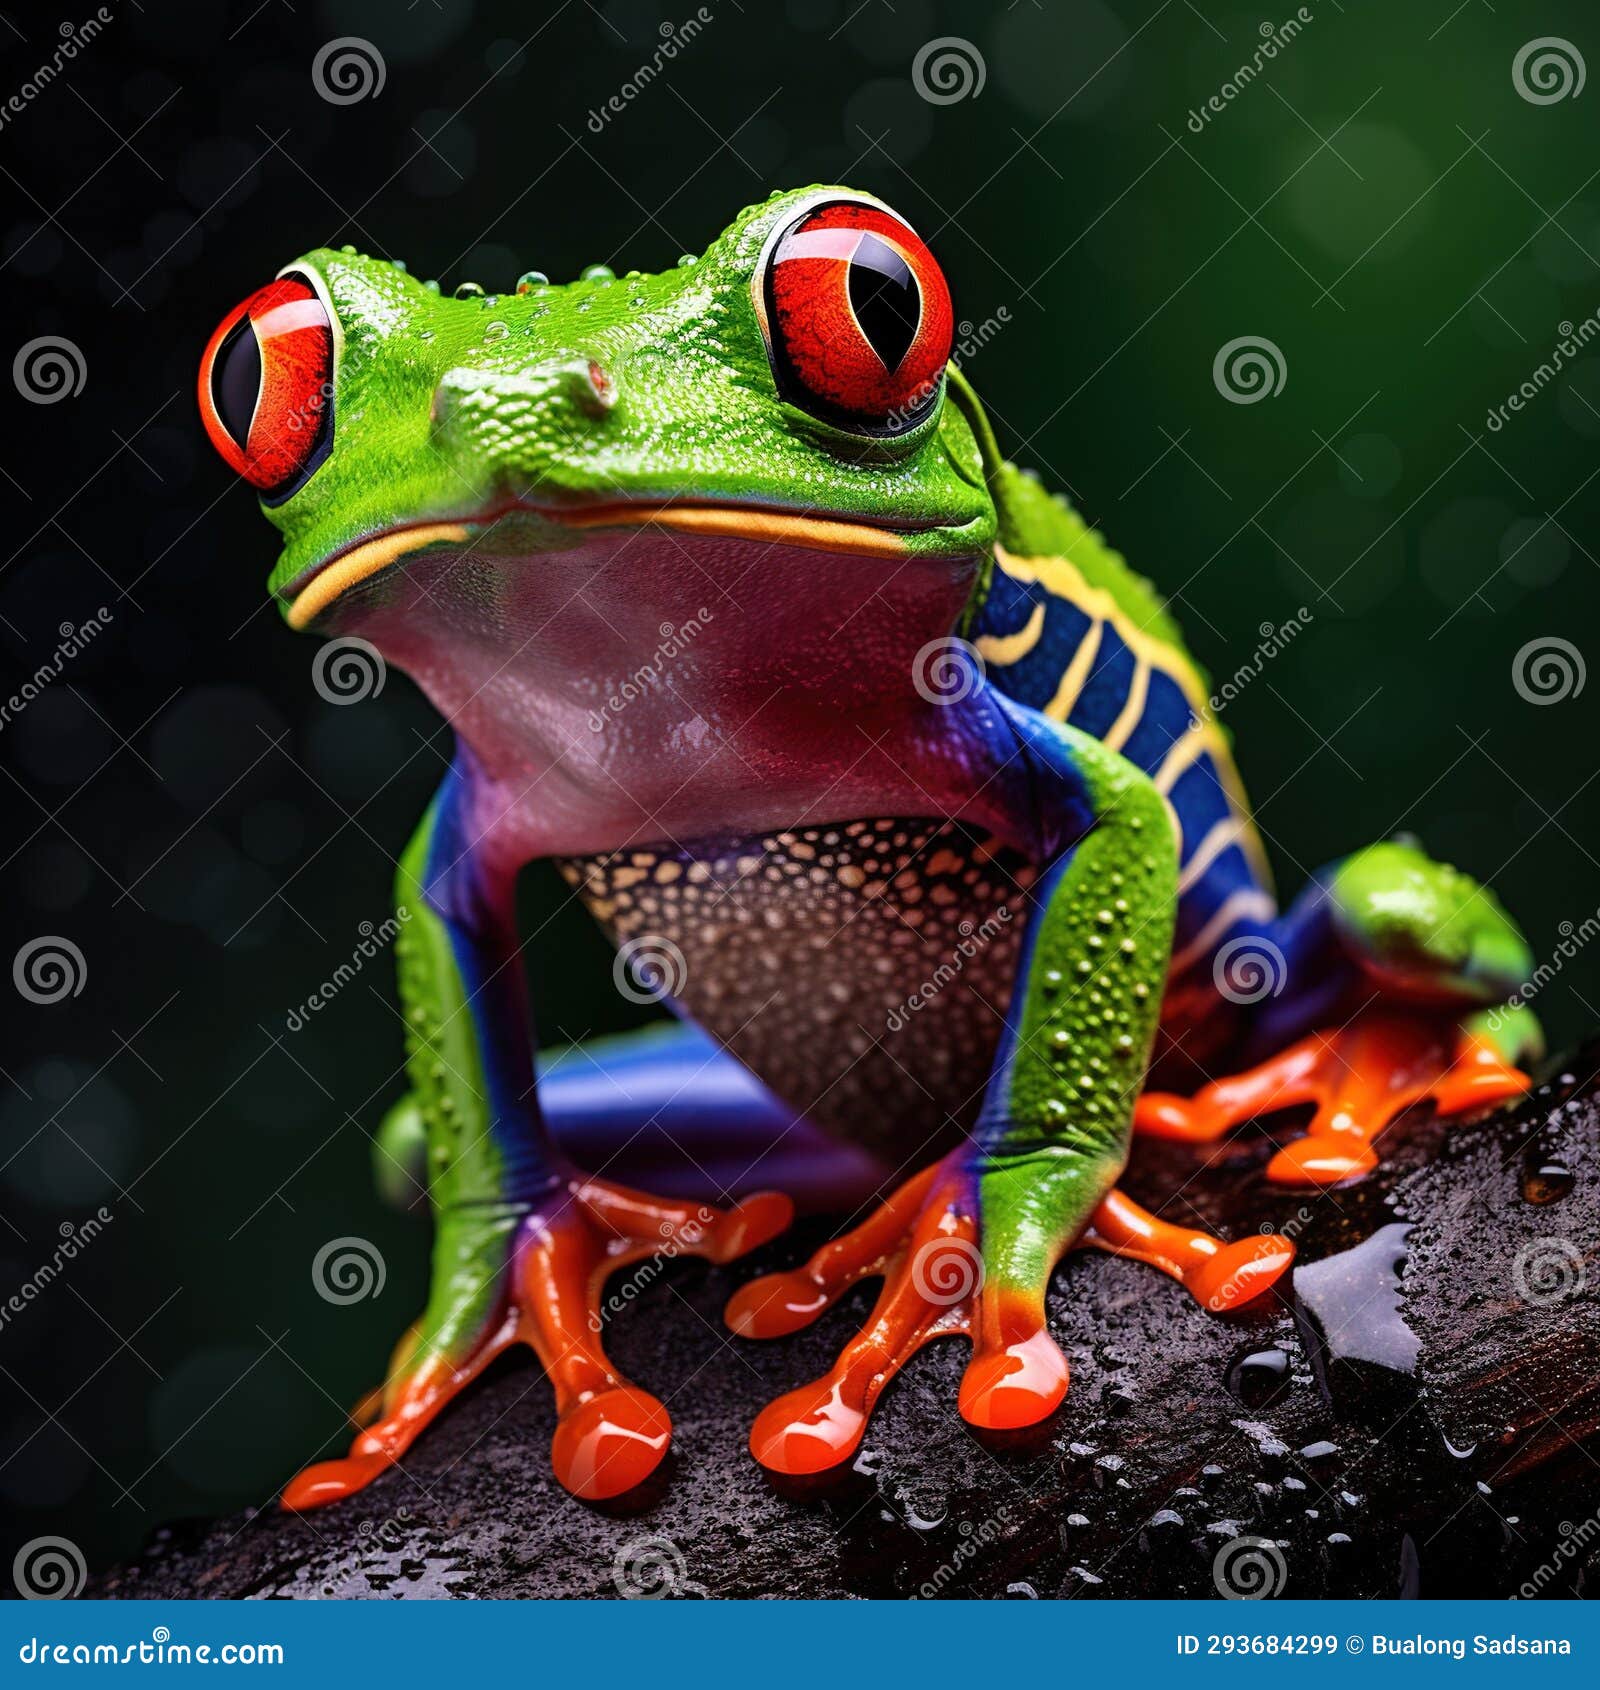 red eyed green tree frog or gaudy tree frog